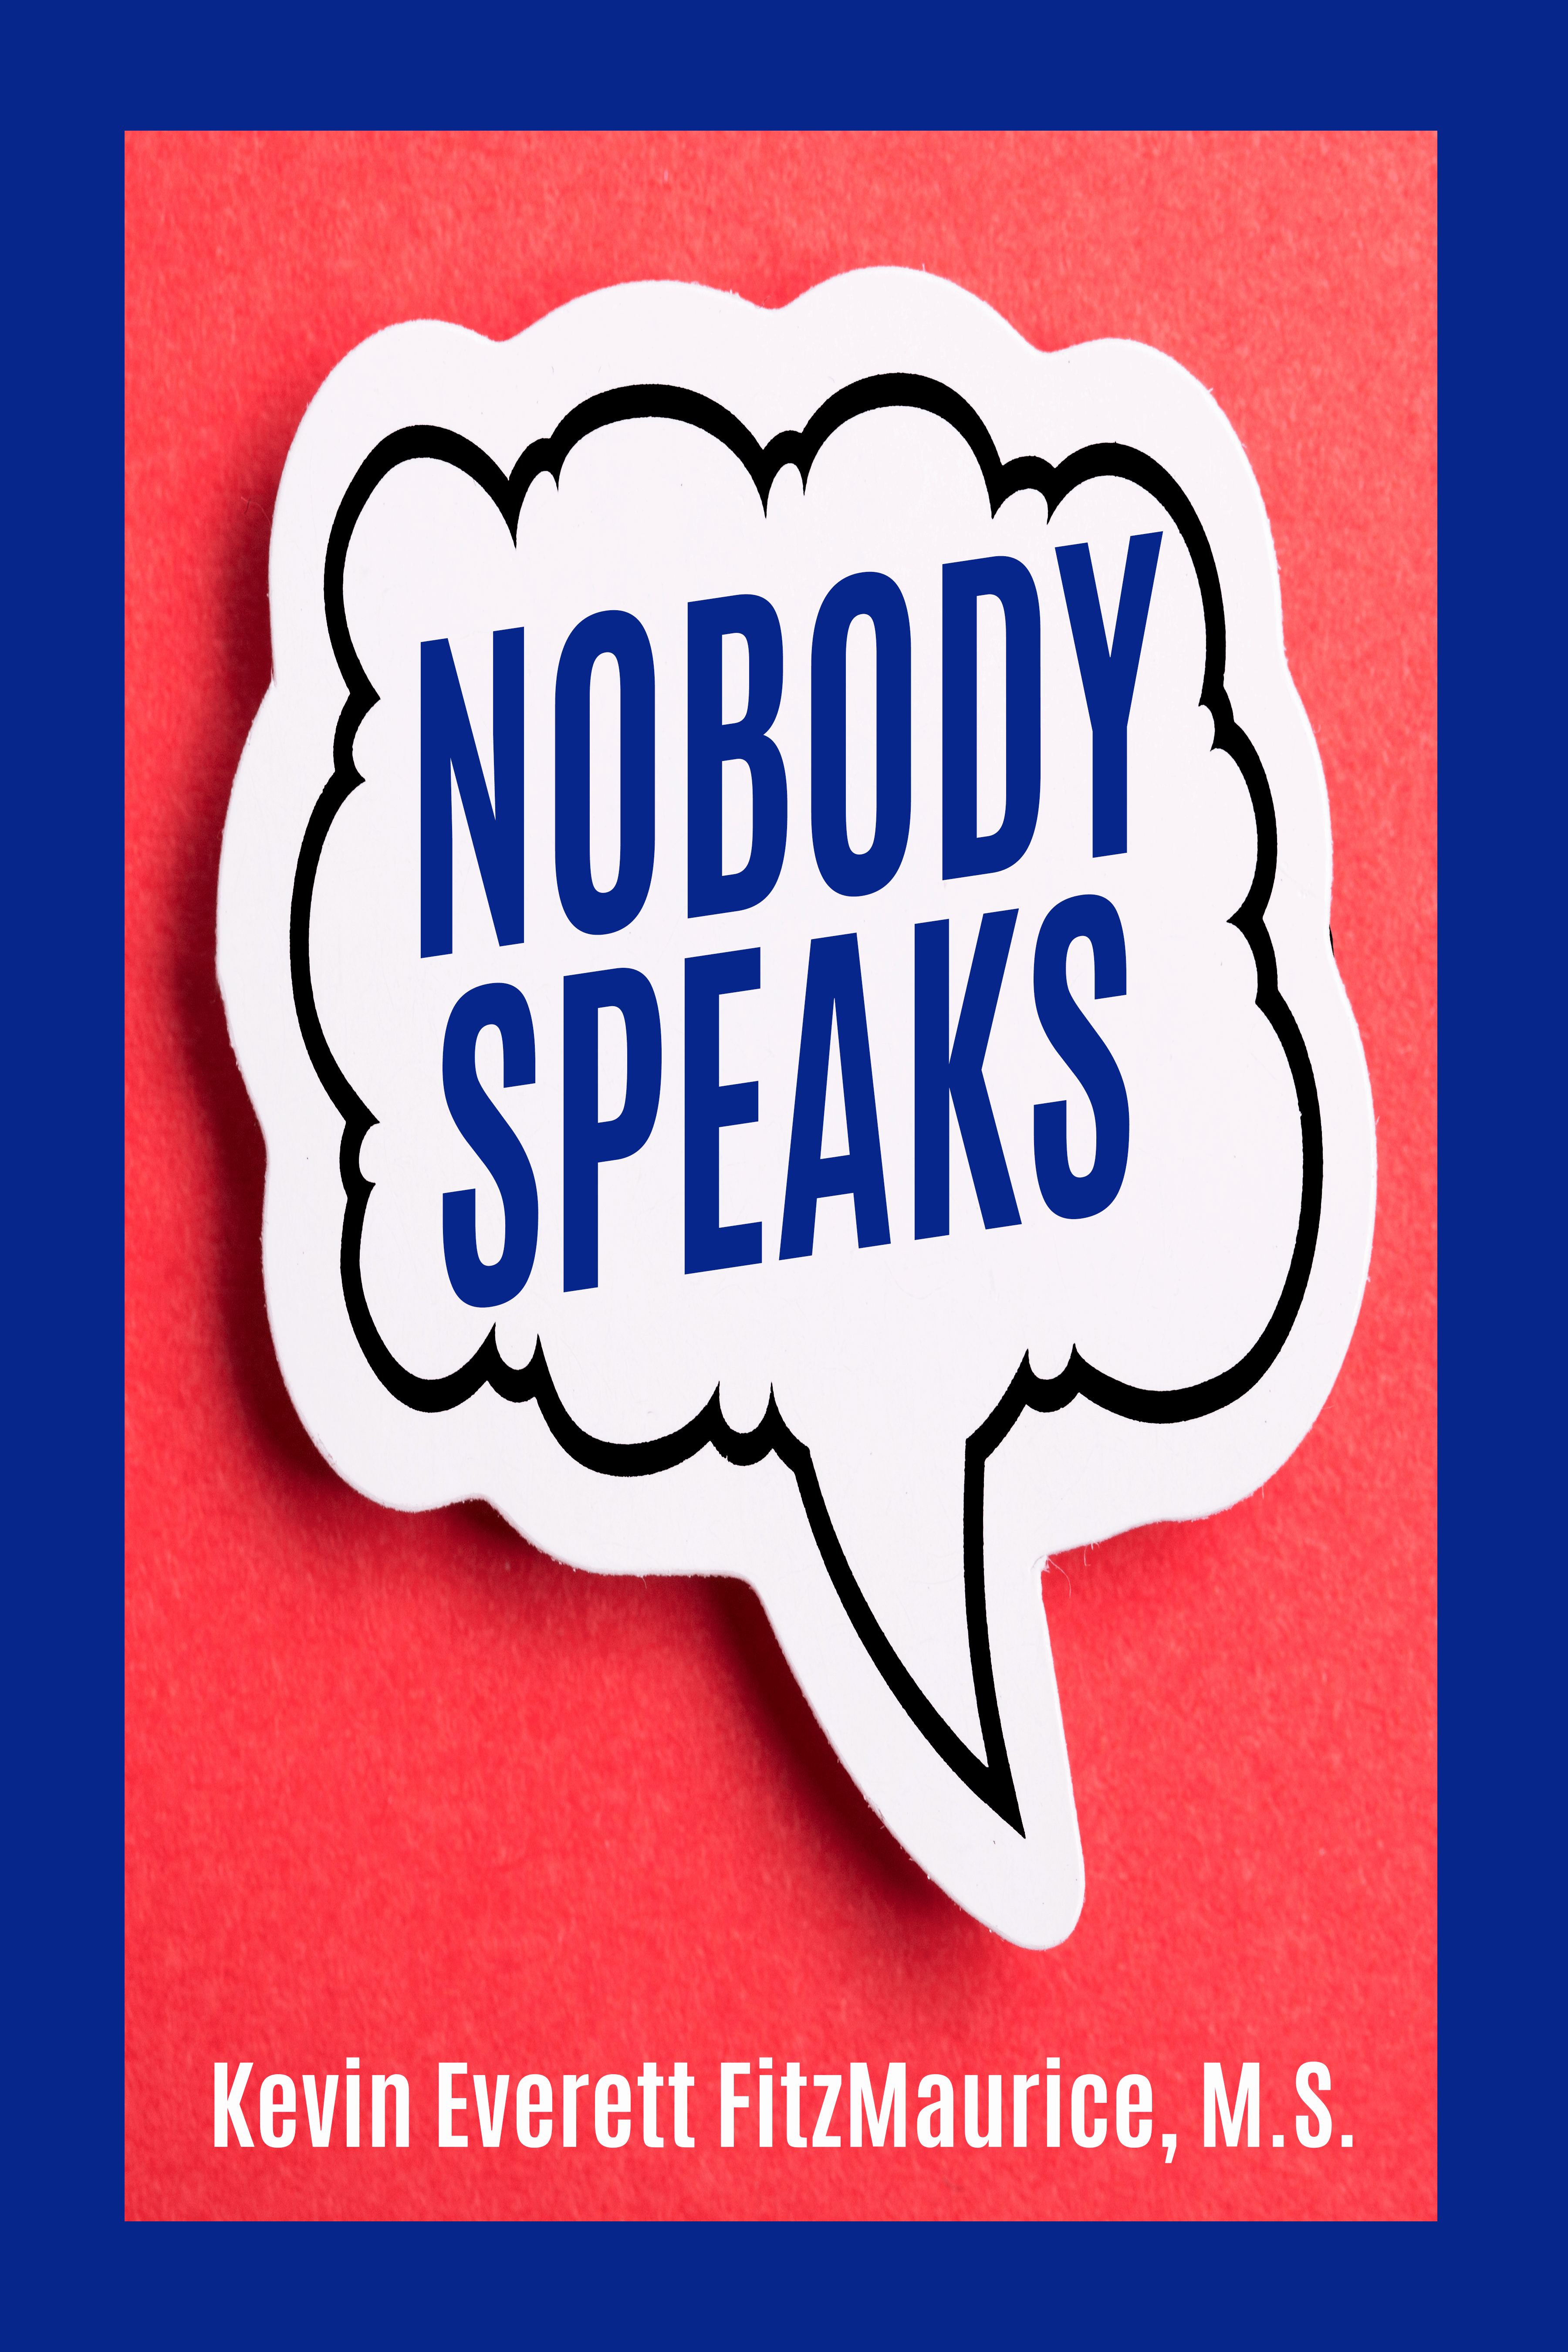 Book cover for the book "Nobody Speaks"